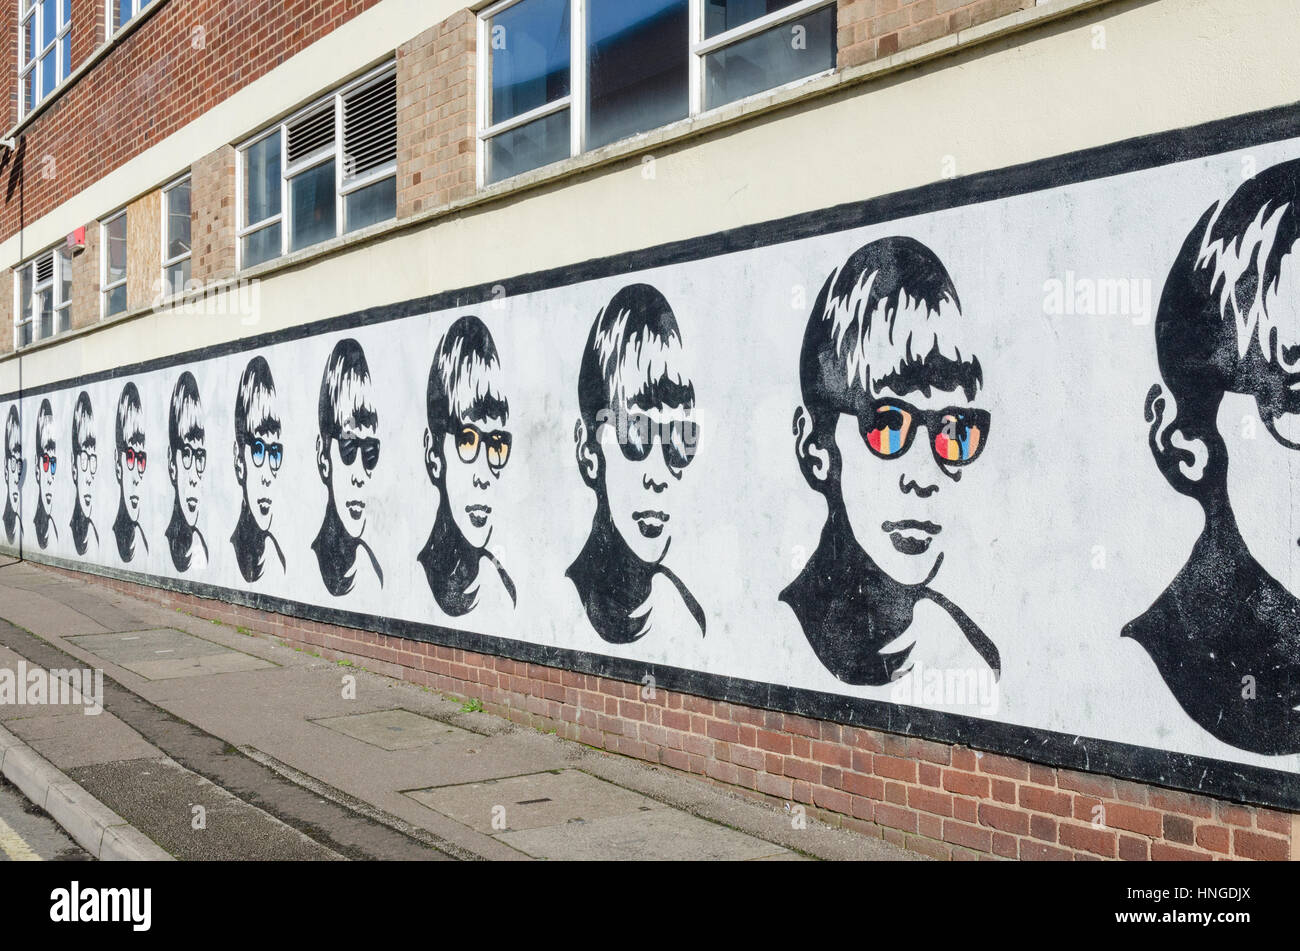 Boy with Glasses mural in Lower Essex Street, Birmingham painted by the street artist Golden Boy Stock Photo